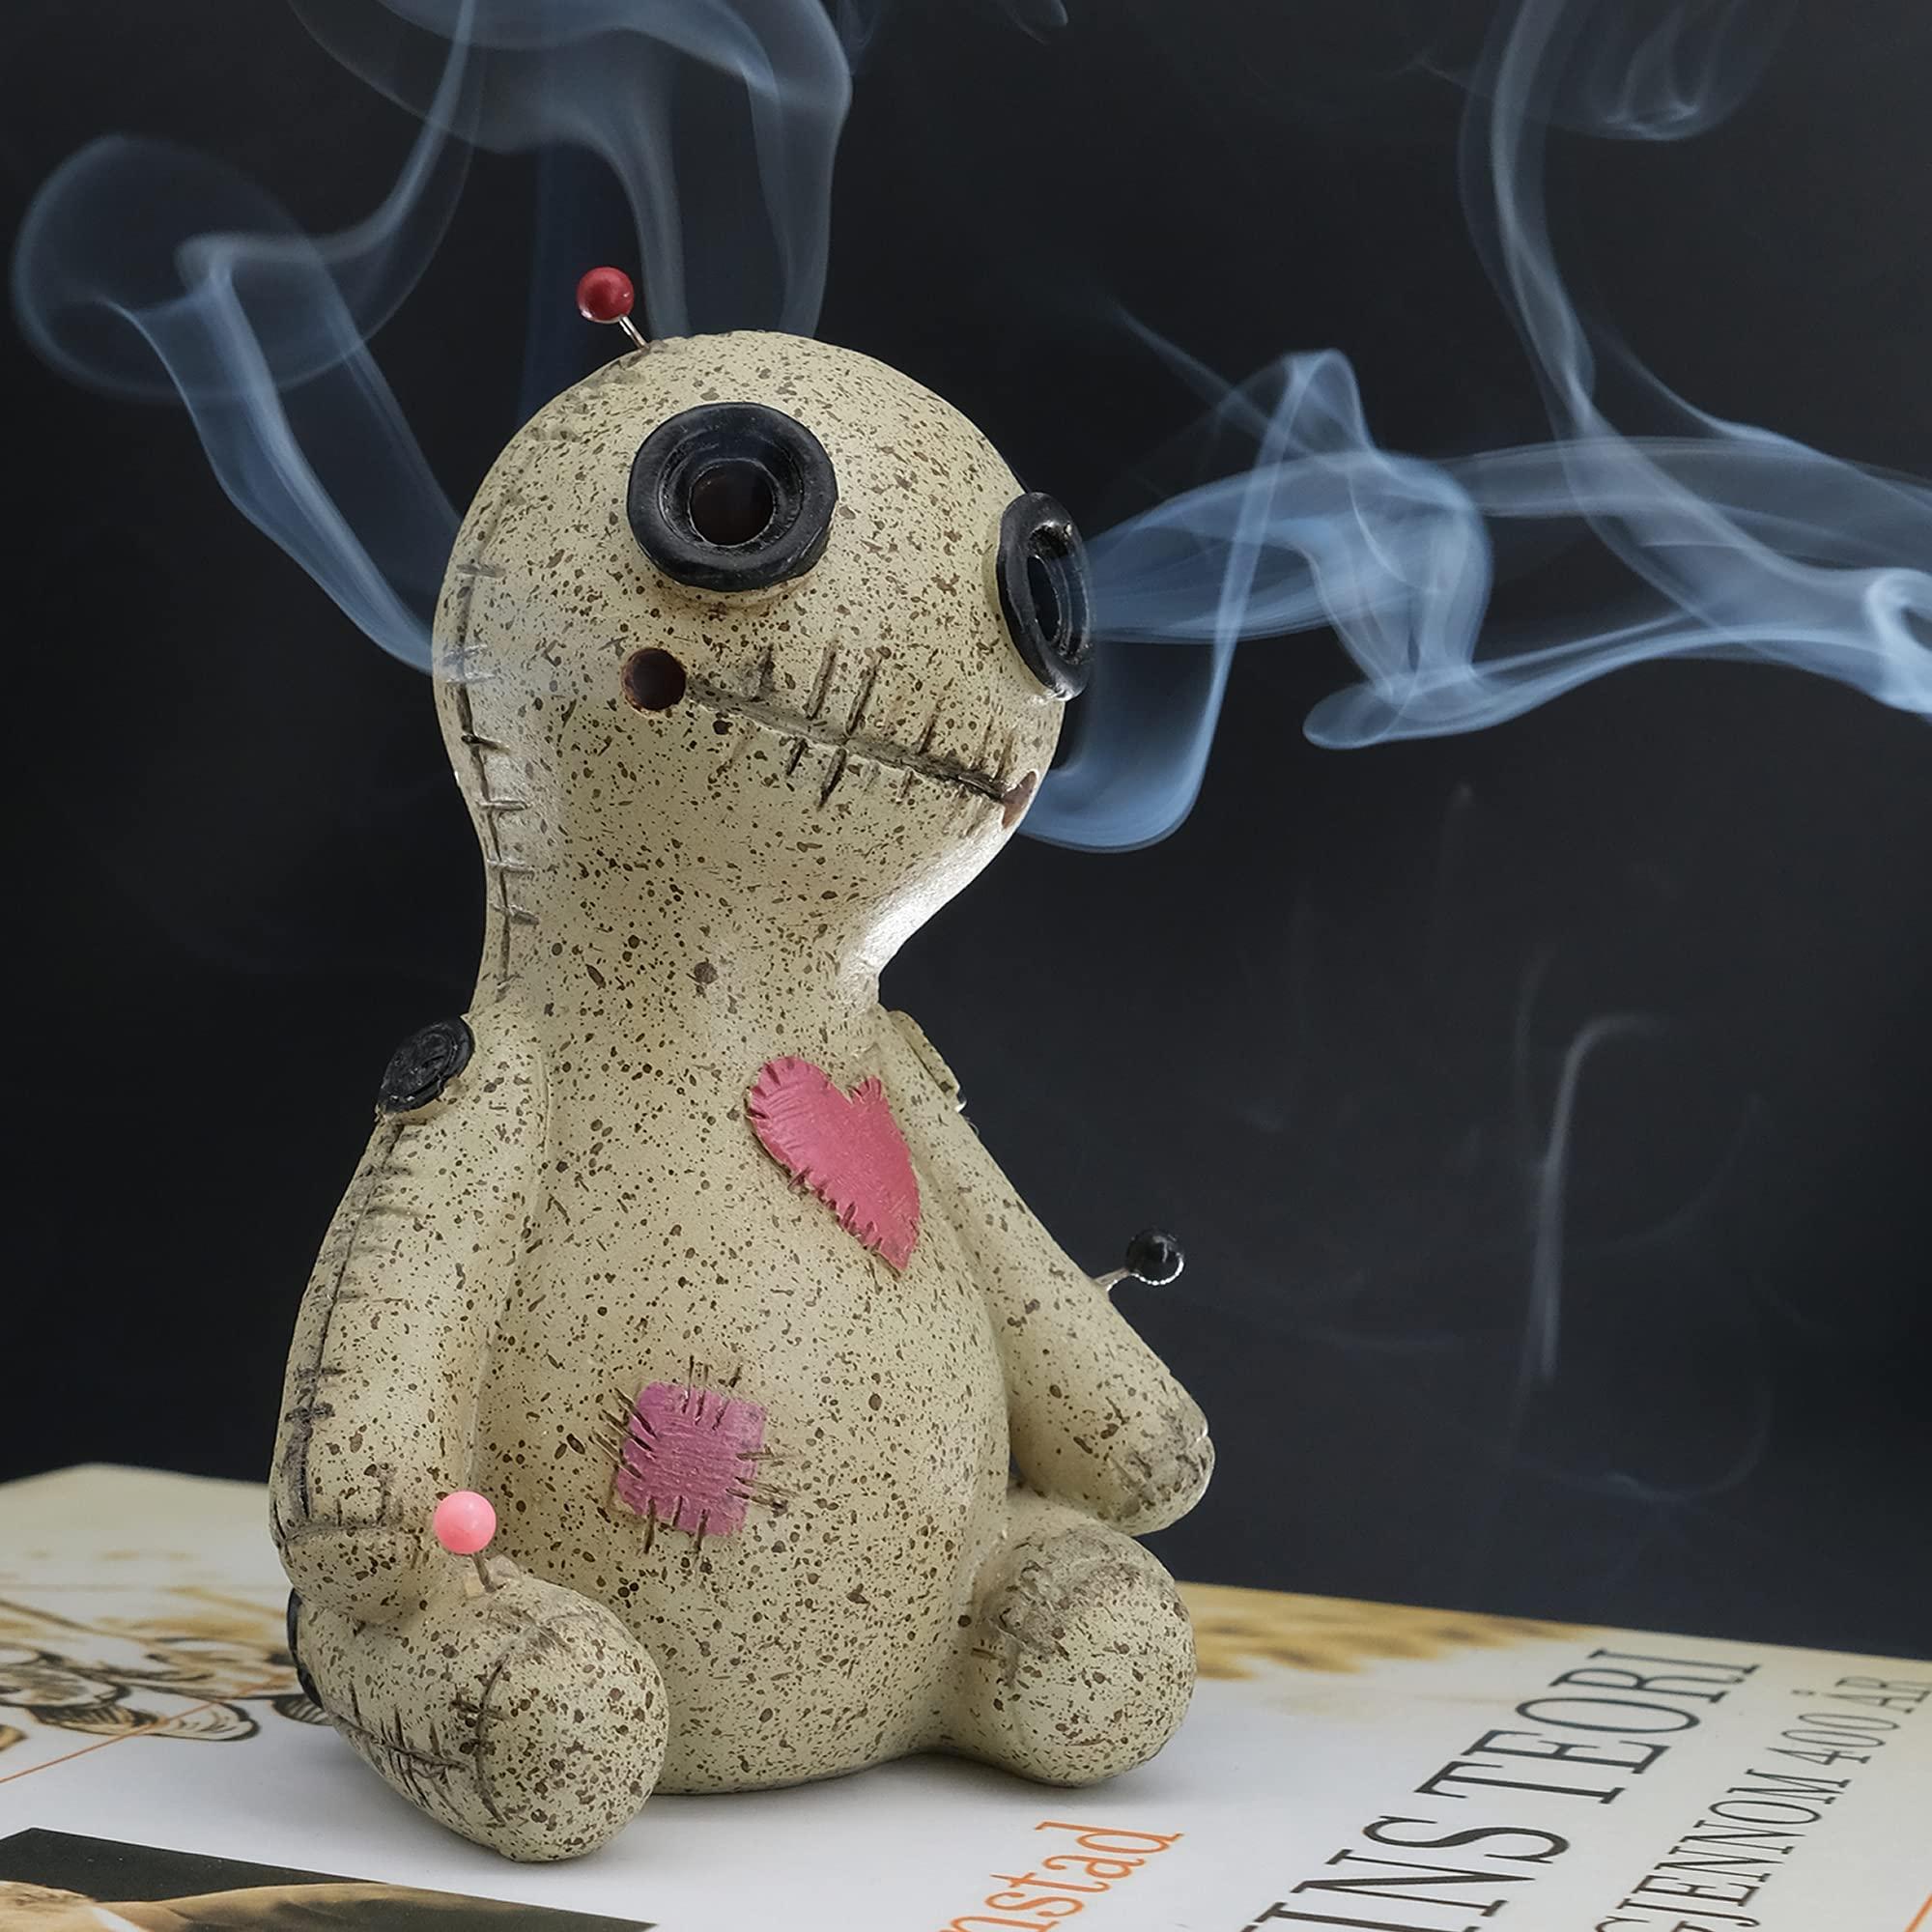 Voodoo Doll Cone Burner, Smoke Coming Out of The Eyes and Corners of The Mouth, Voodoo Doll Incense Burner Desktop Resin Ornament for Yoga Room, Ornament Handmade Craft for Home Decoration(Right)